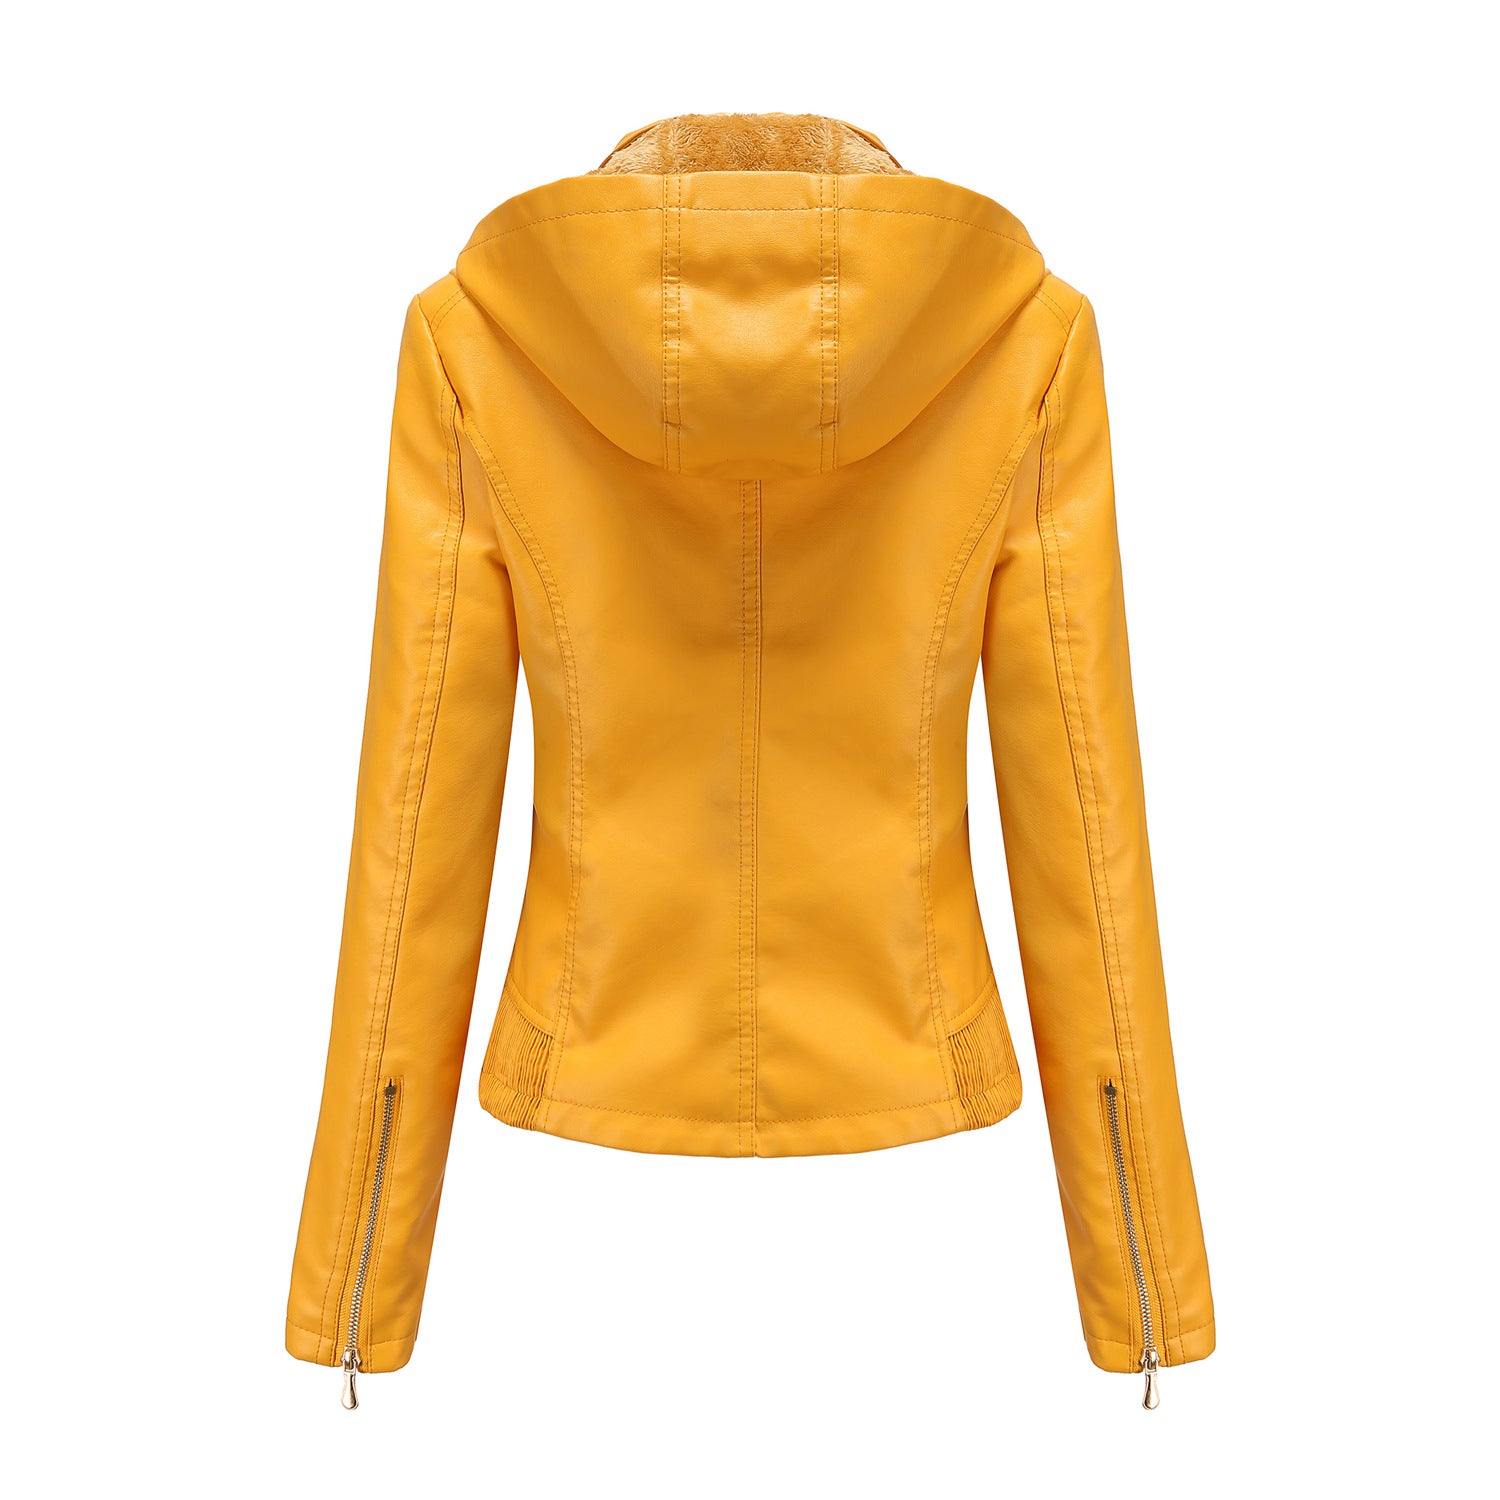 casual women's jacket Leather